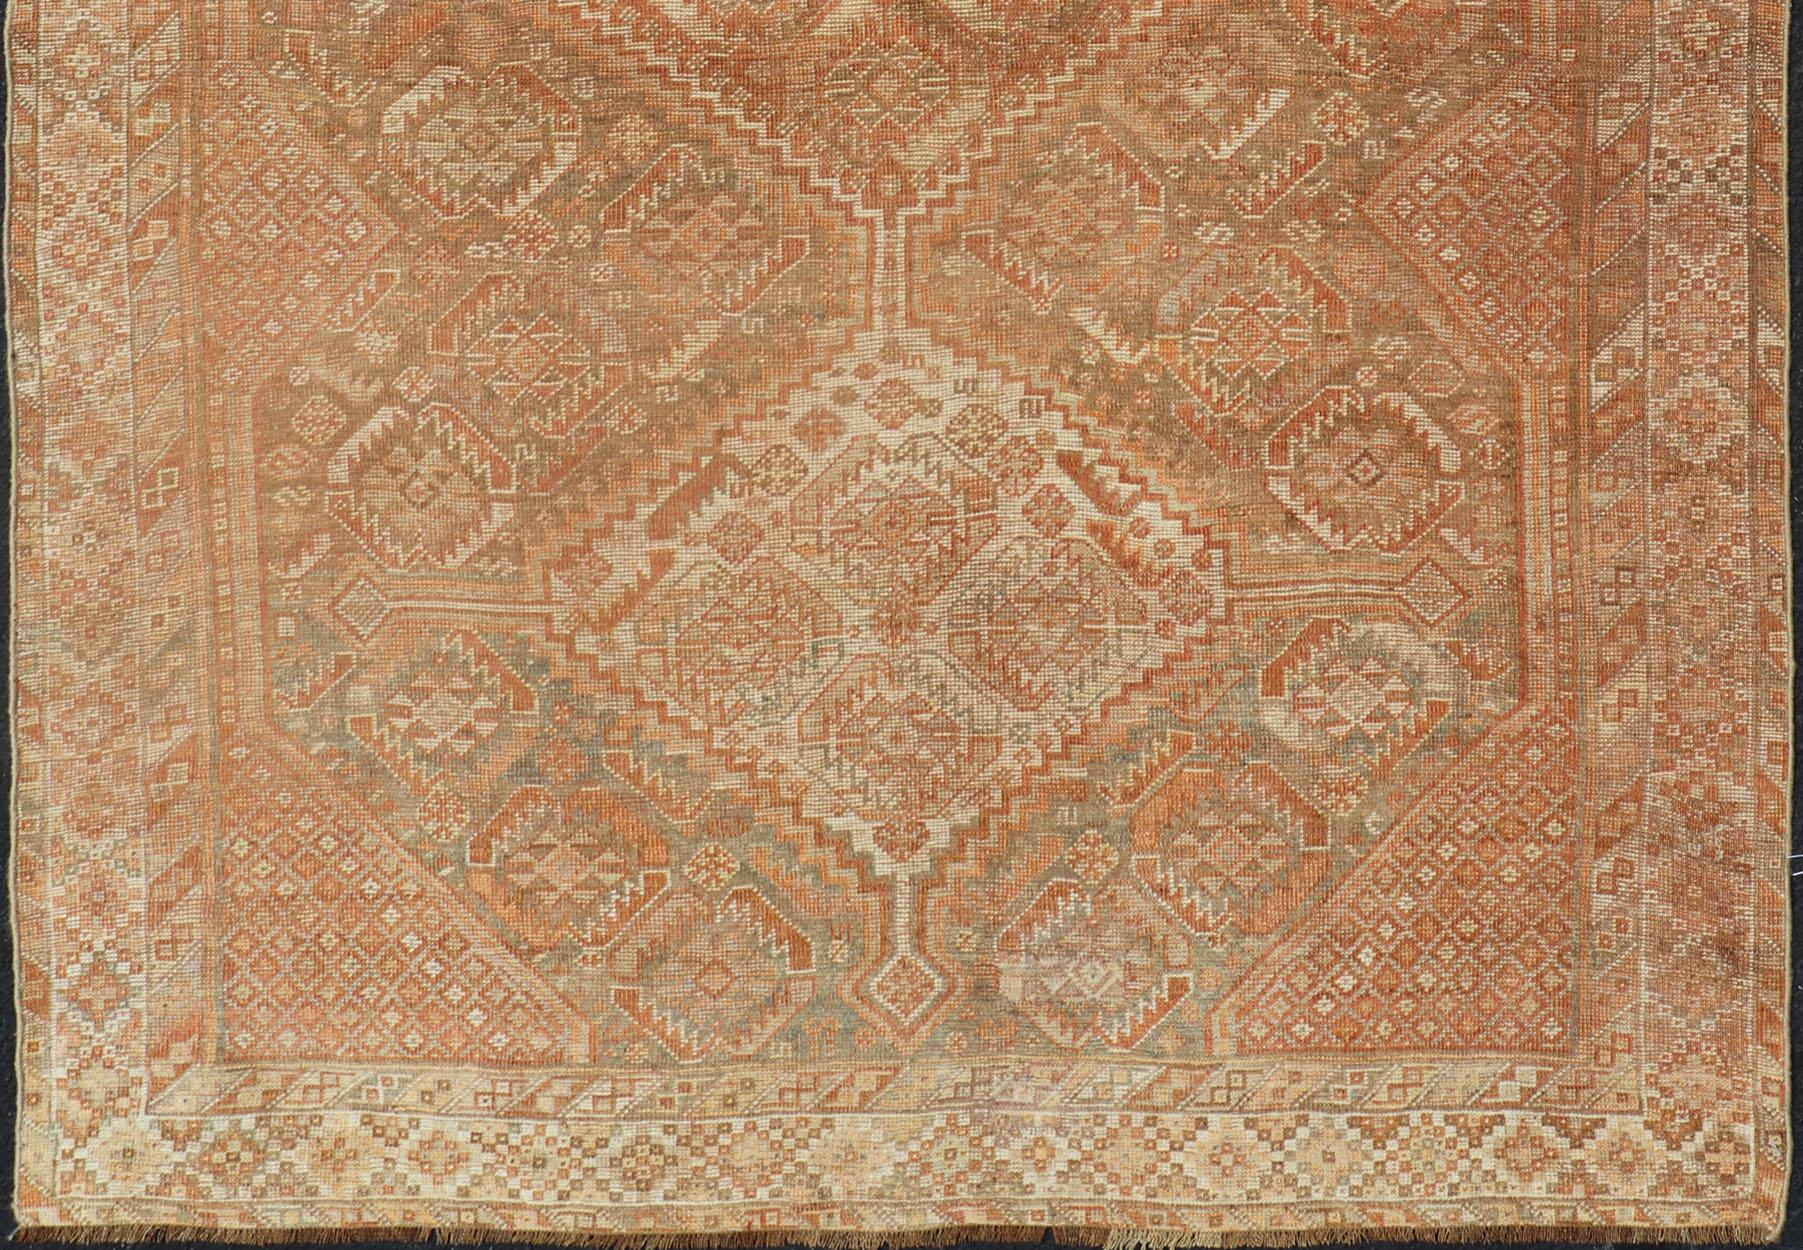 Tribal Antique Distressed Persian Shiraz Rug in Shades of Soft Orange, Lt. Brown, Gray For Sale